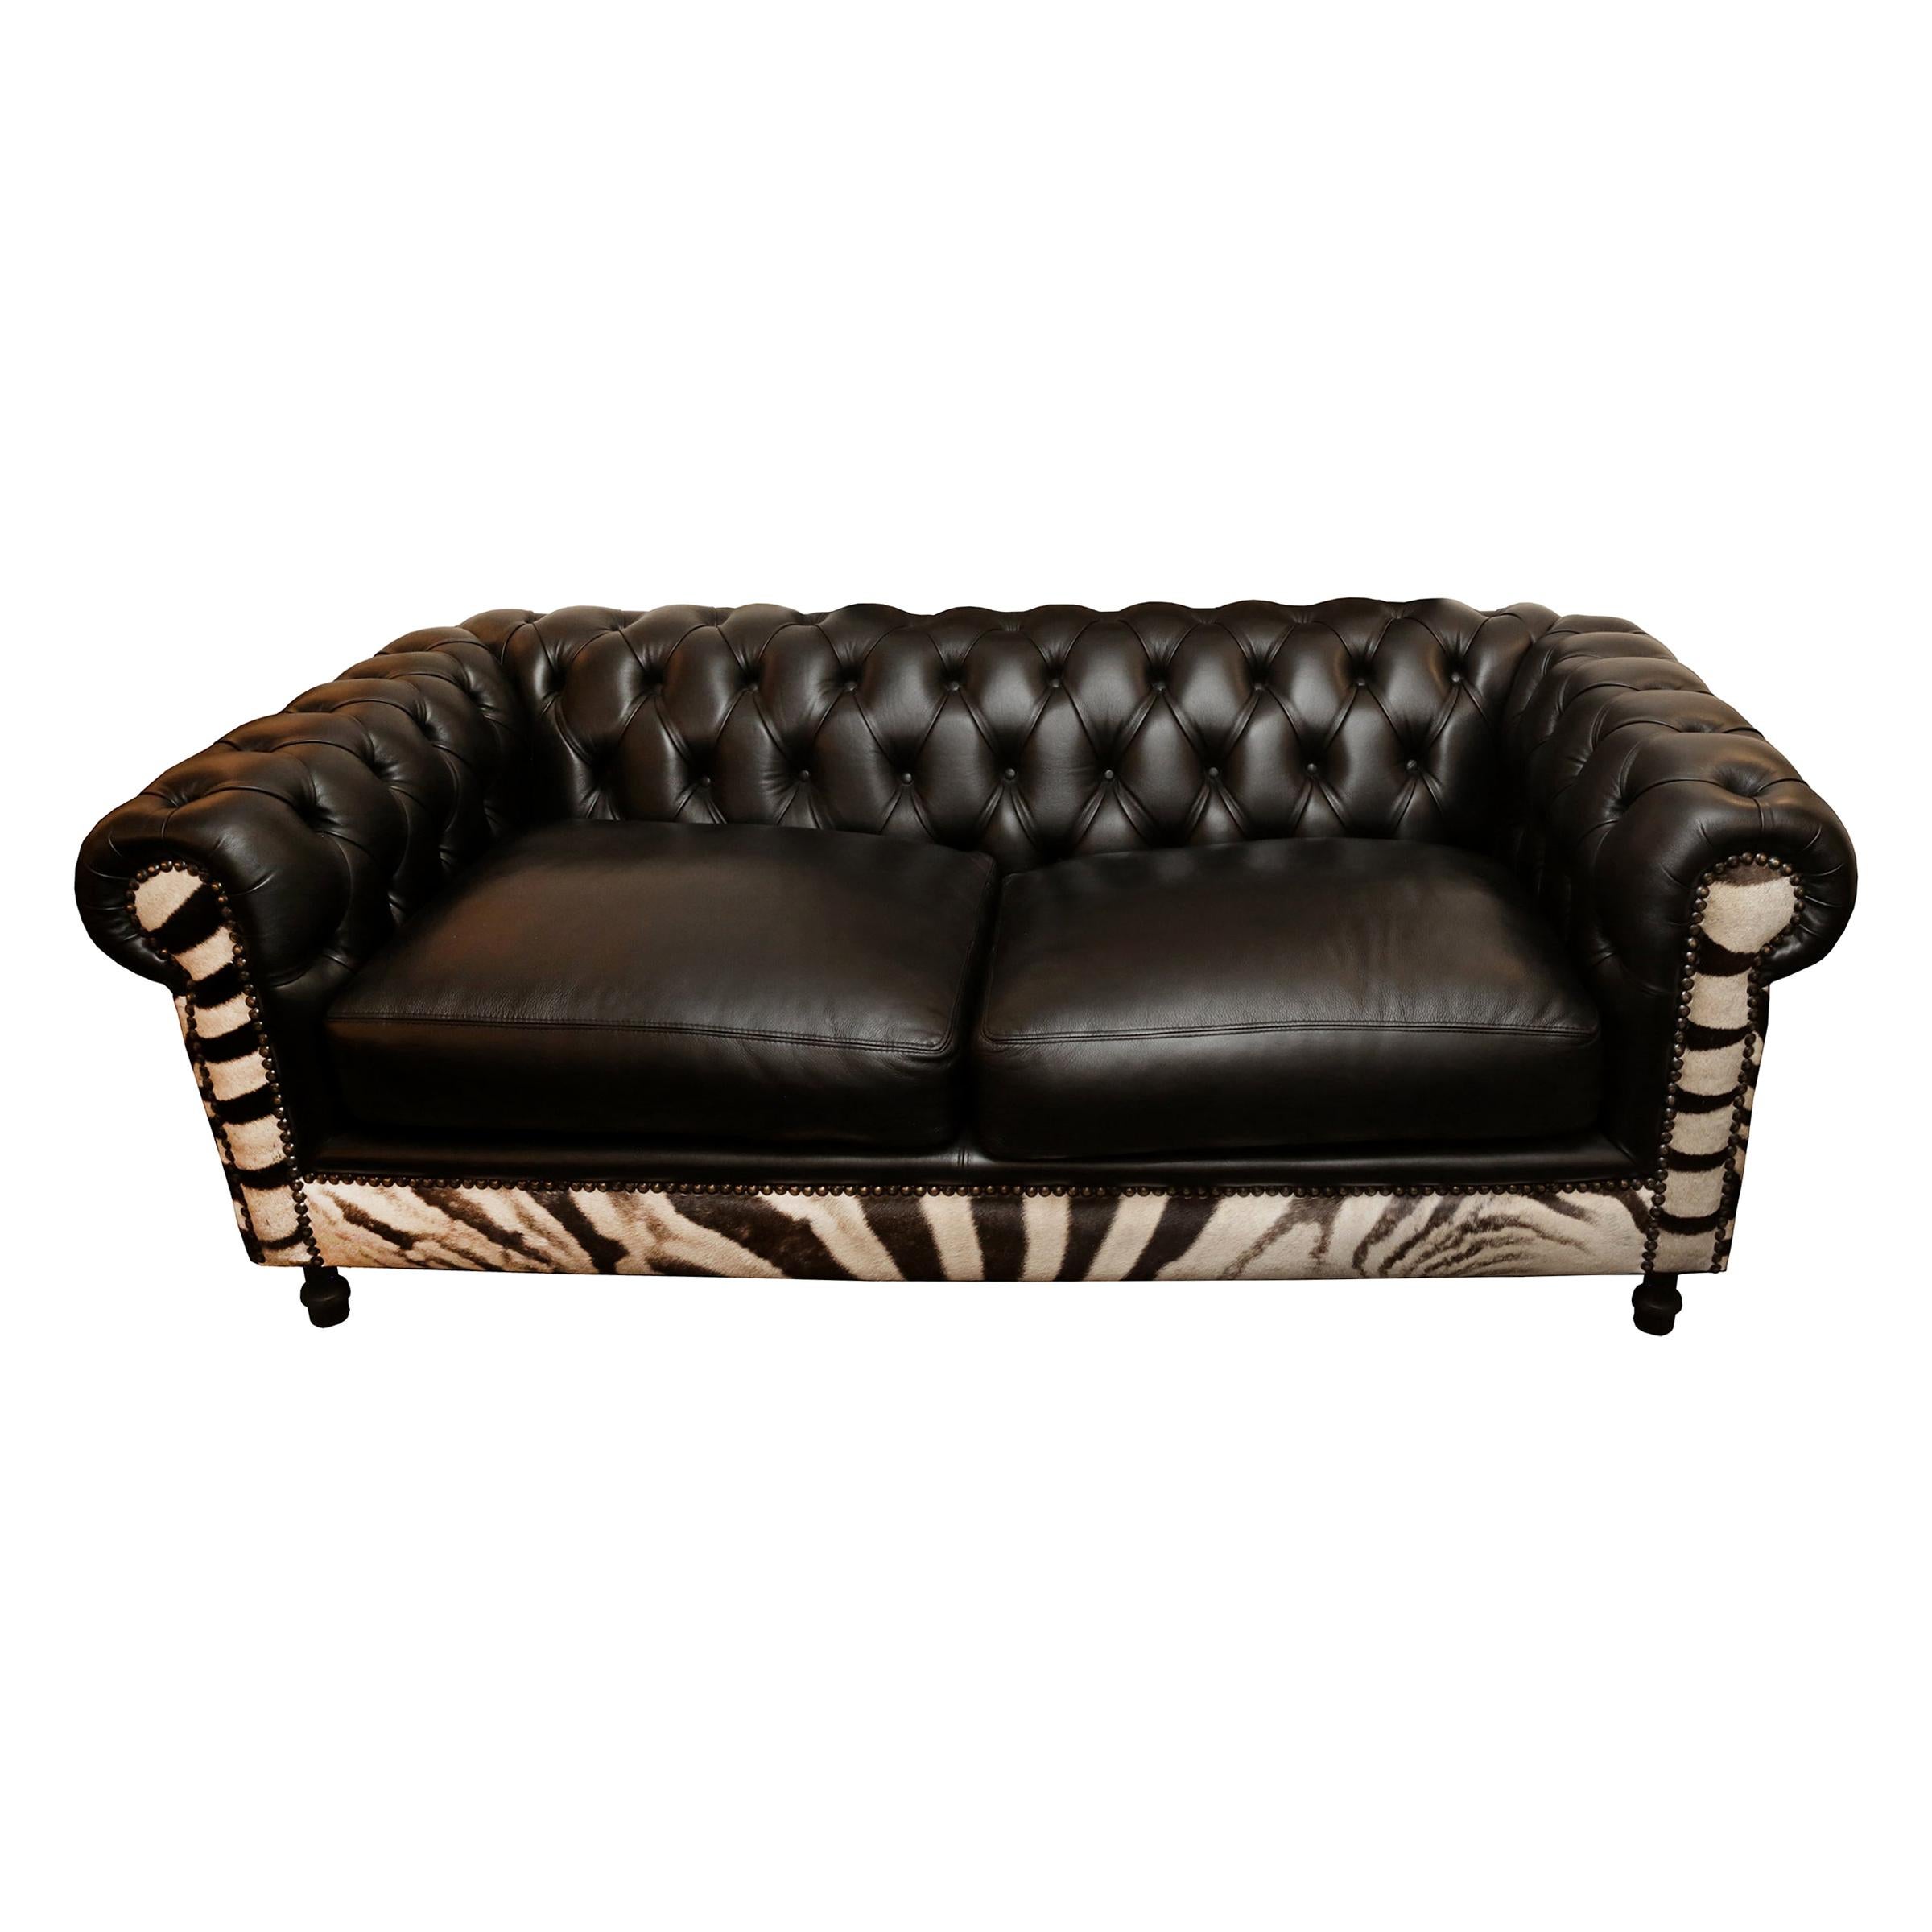 Real Zebra Skin And Black Leather, Patent Leather Sofa